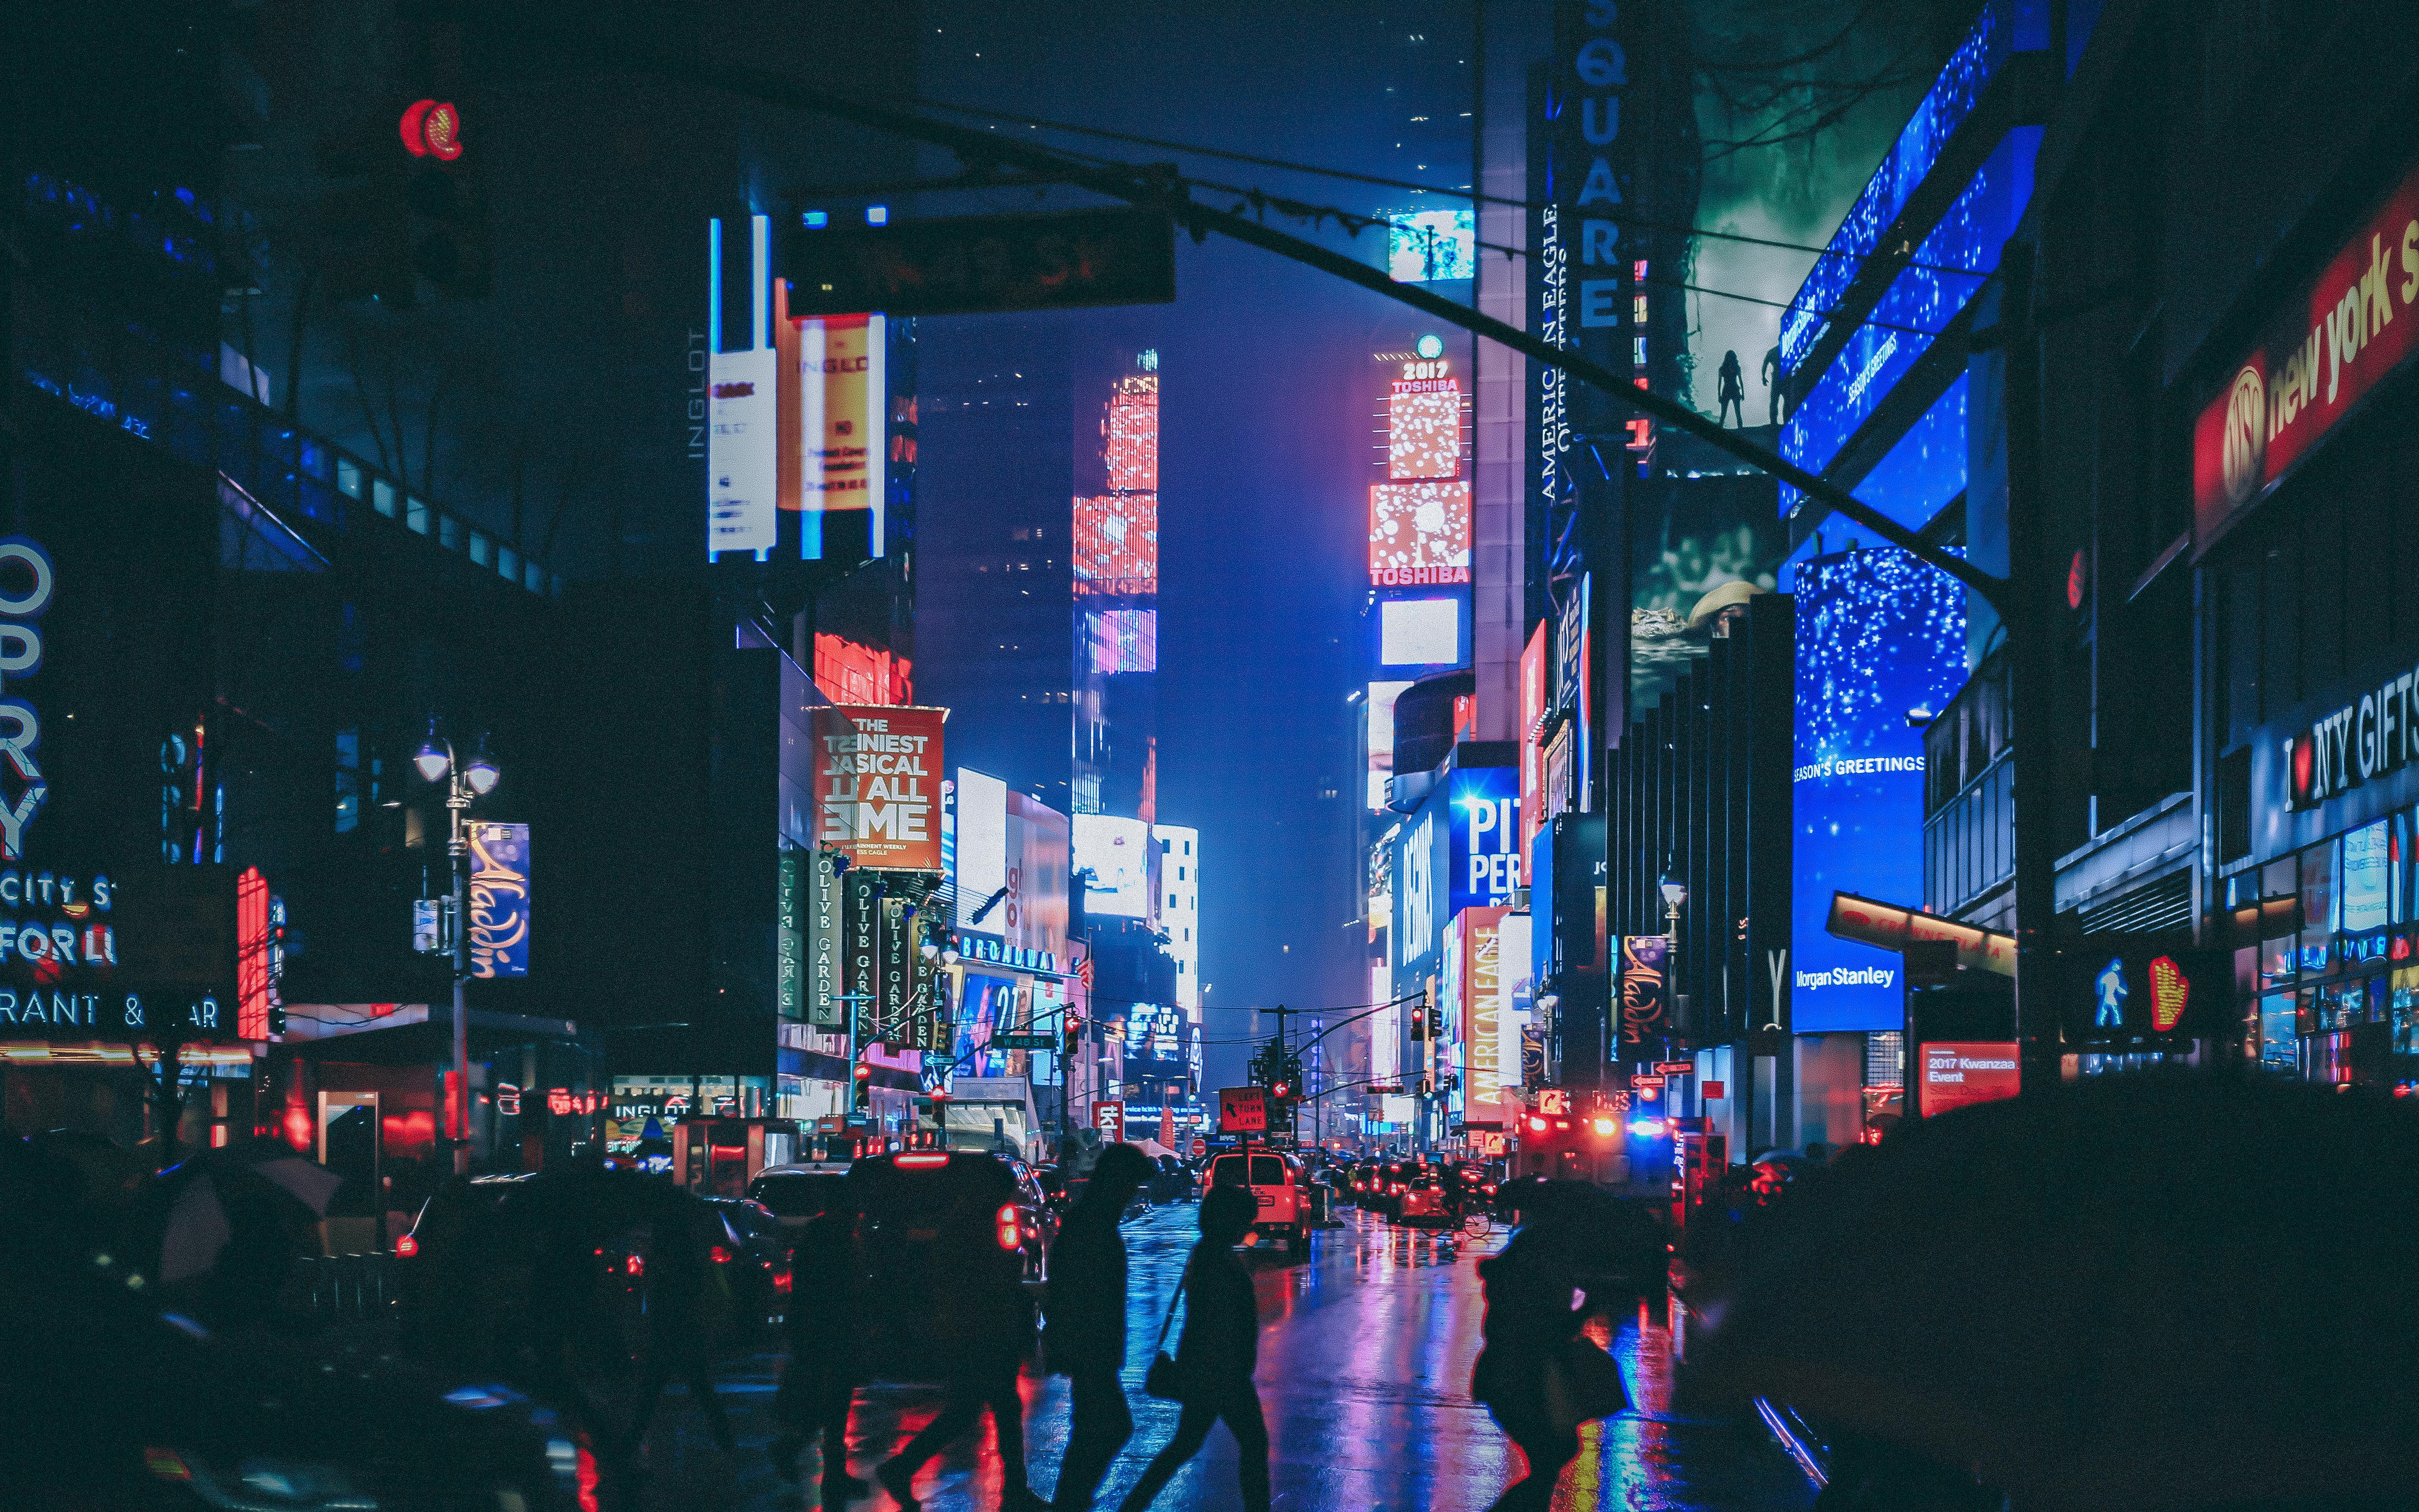 Neon City Photos, Download The BEST Free Neon City Stock Photos & HD Images